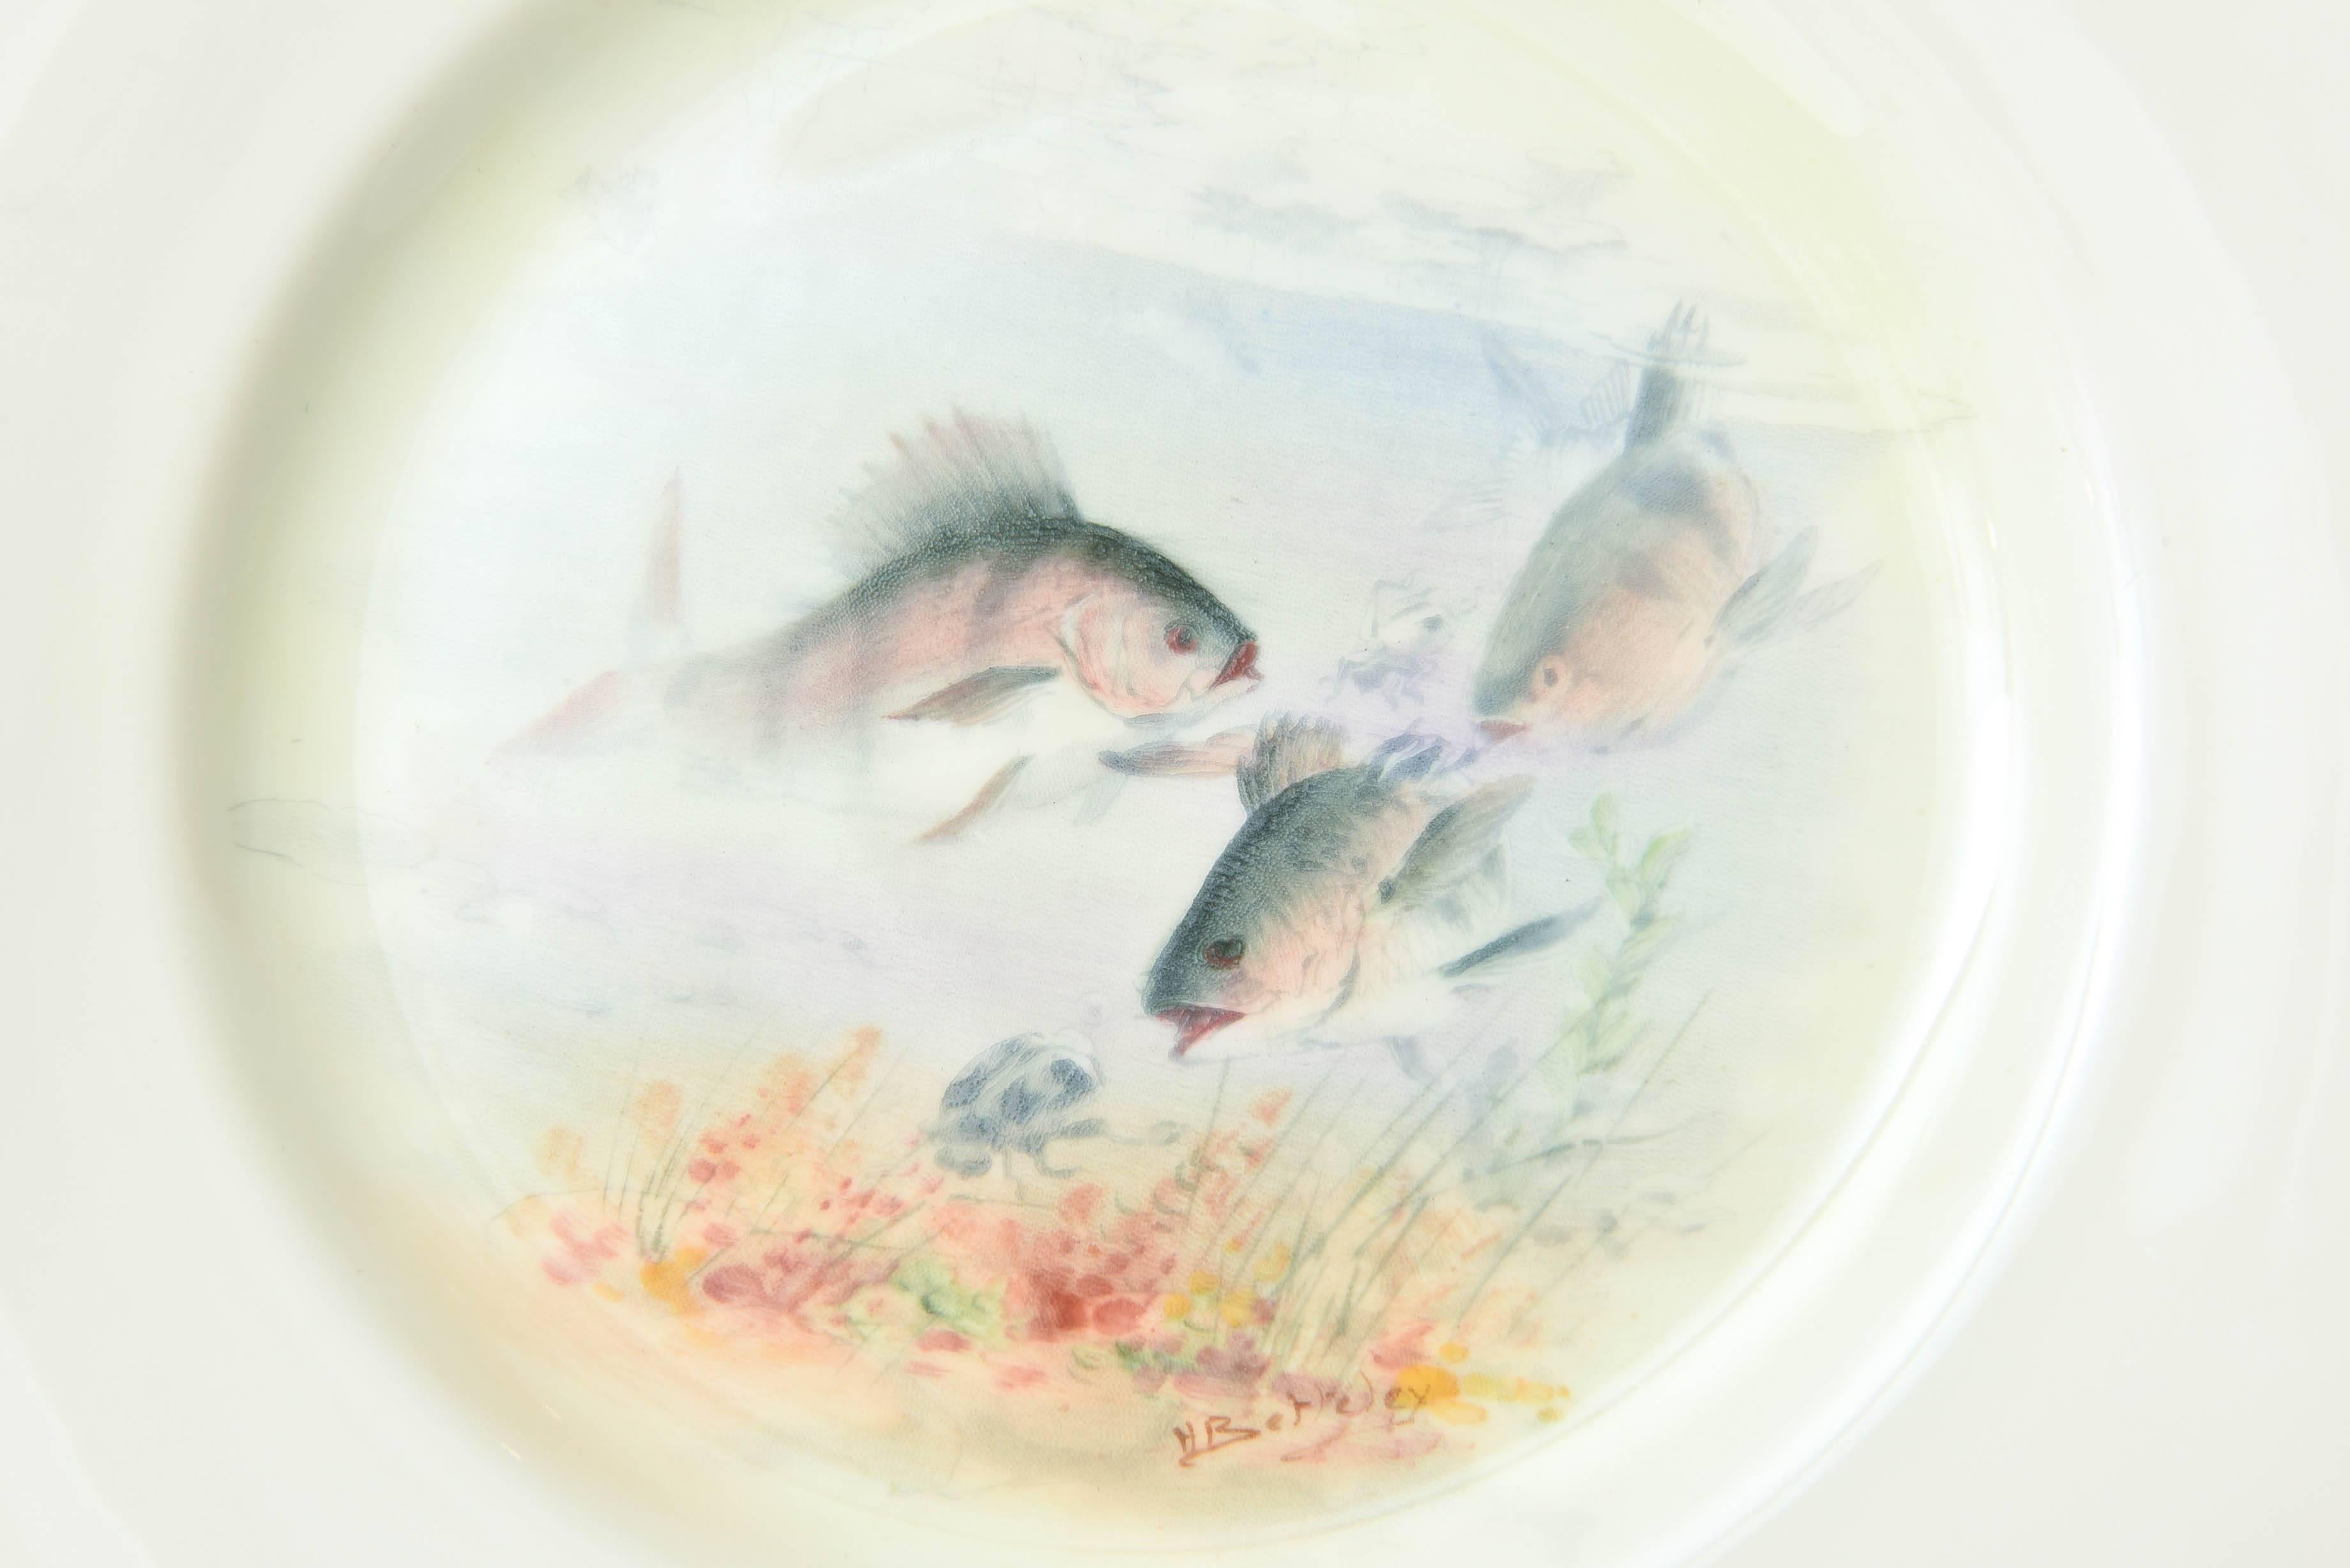 A Classic and elegant fish service consisting of 12 artistically painted fish in their full flora and fauna ground. Trimmed in 24-karat gold and perfect for display, lunch, or fish course. Each bearing the signature of Royal Doulton's premier artist